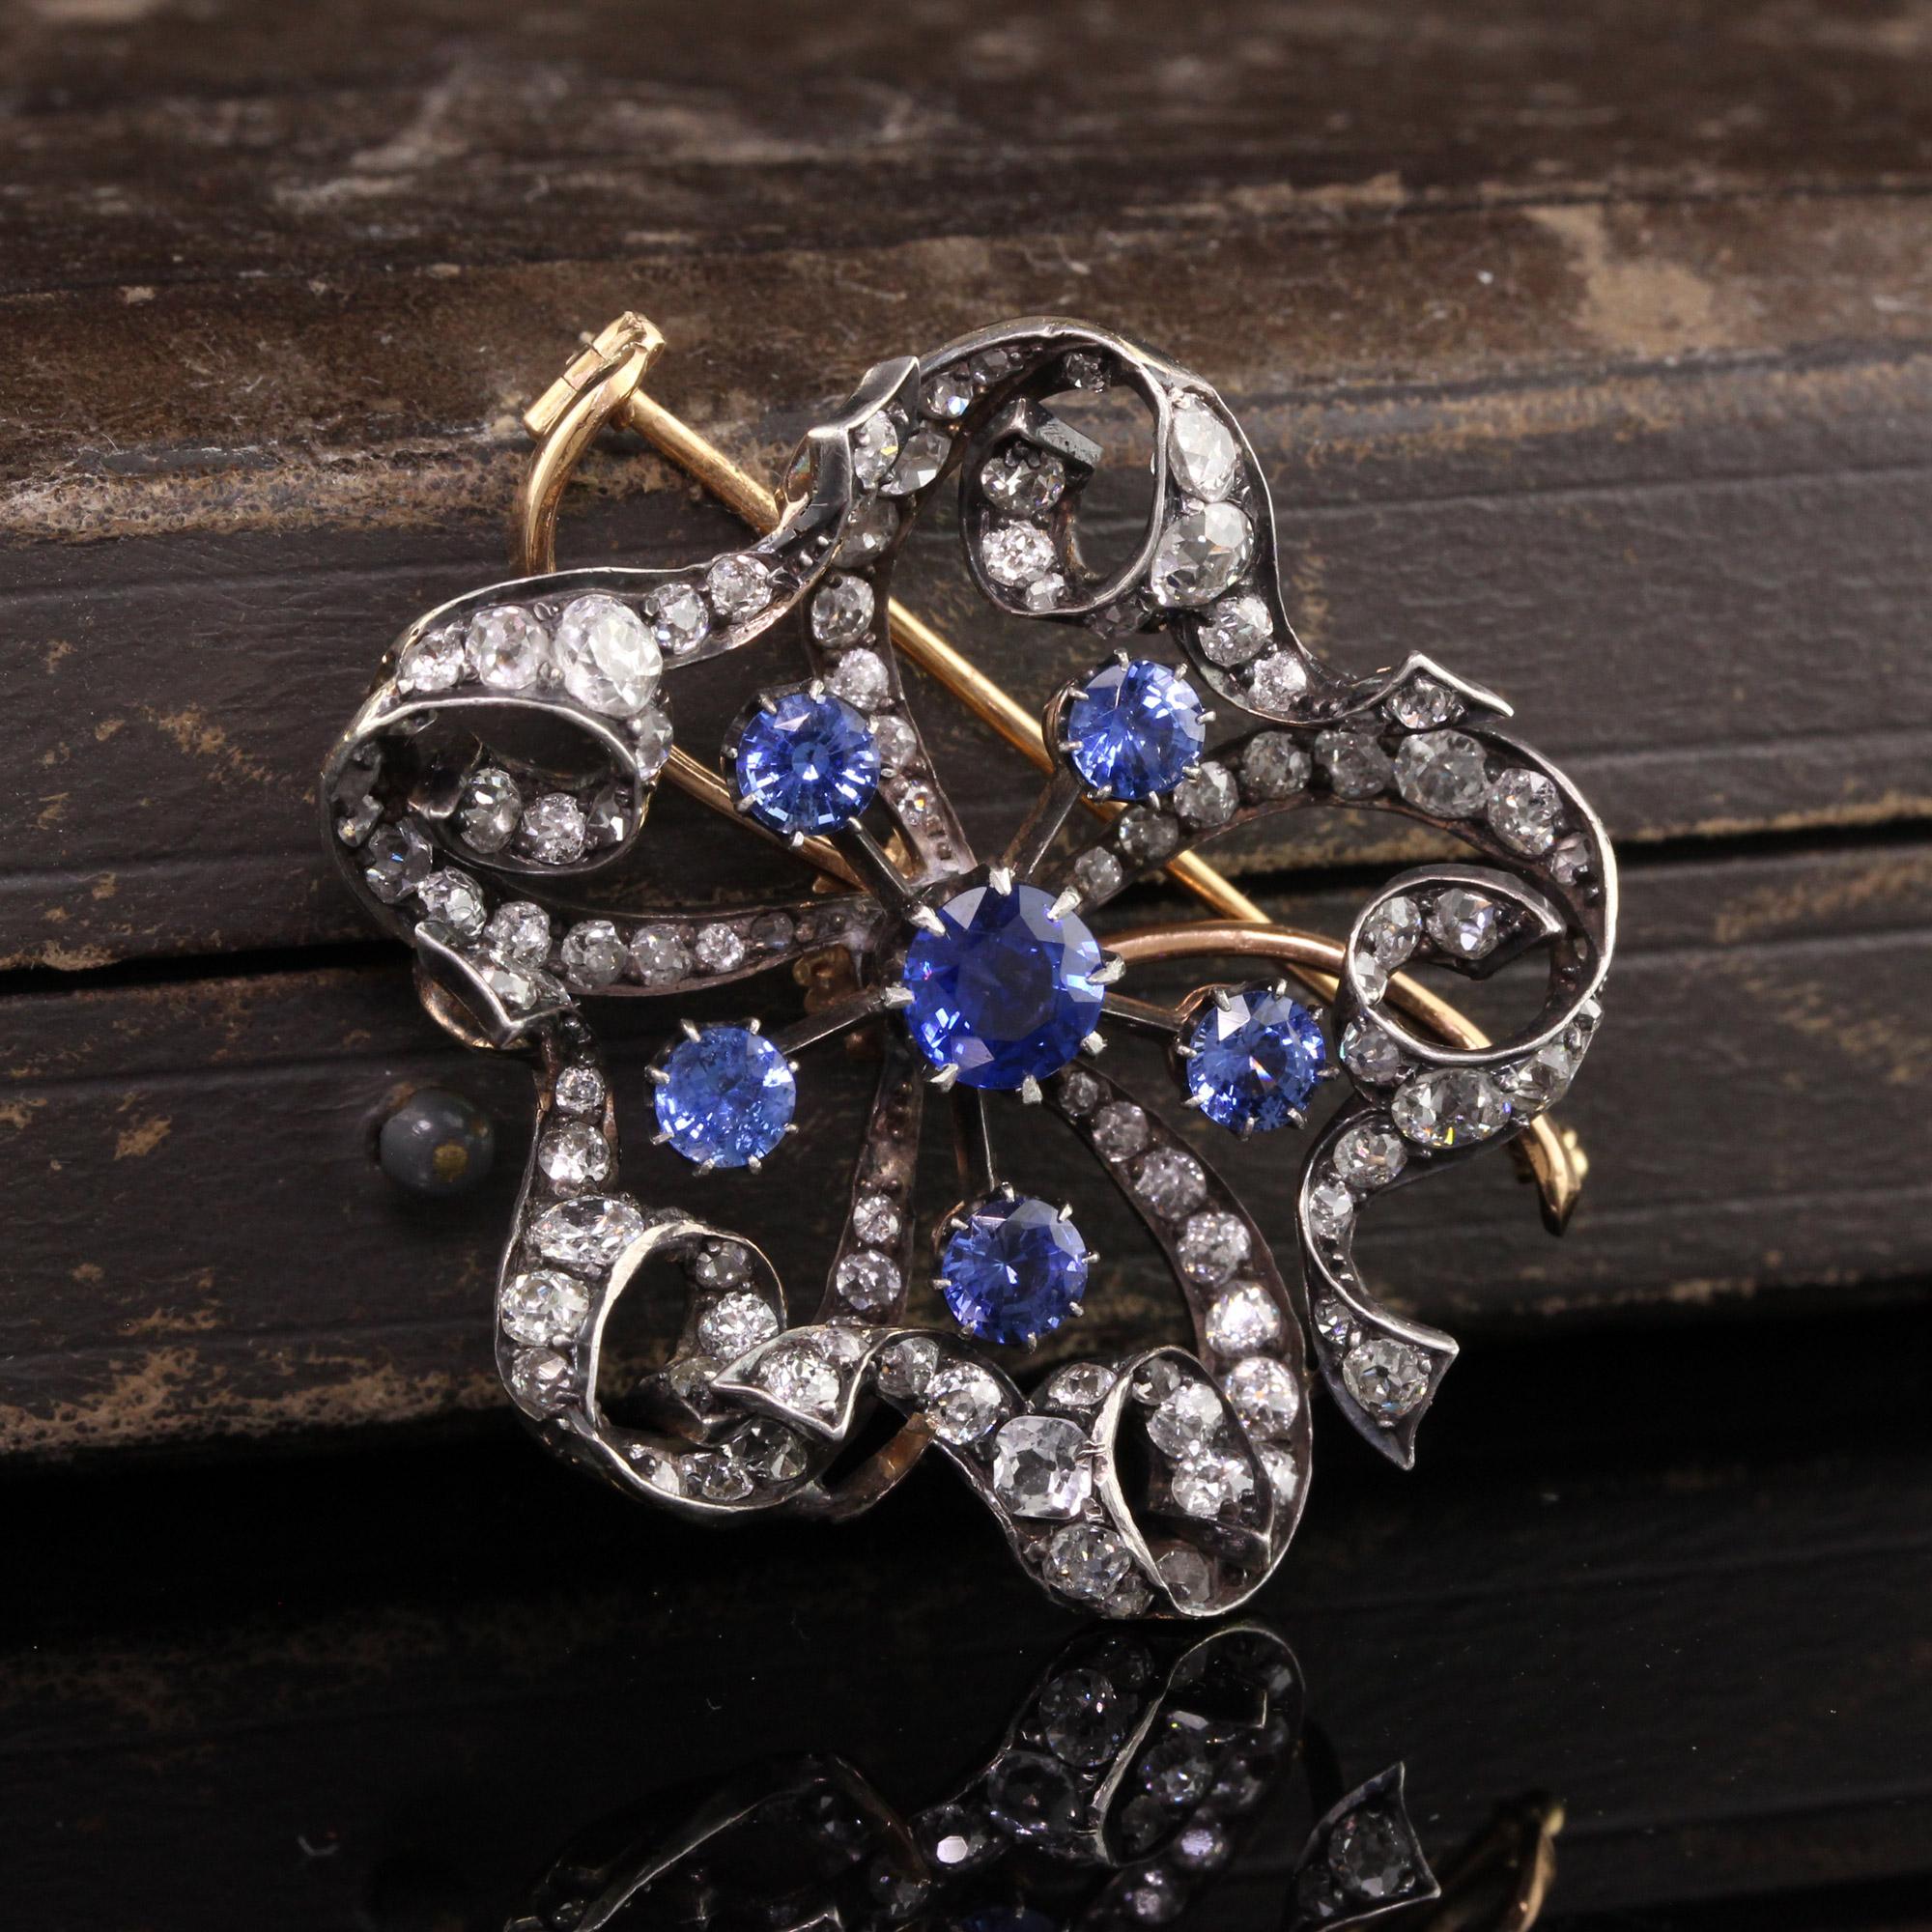 Beautiful Antique Victorian 18K Yellow Gold Silver Top Old Mine Diamond and Sapphire Pin. This gorgeous Victorian pin has old mine cut diamonds and sapphire on the pin. The sapphires are bright blue and very striking.

Item #P0135

Metal: 18K Yellow